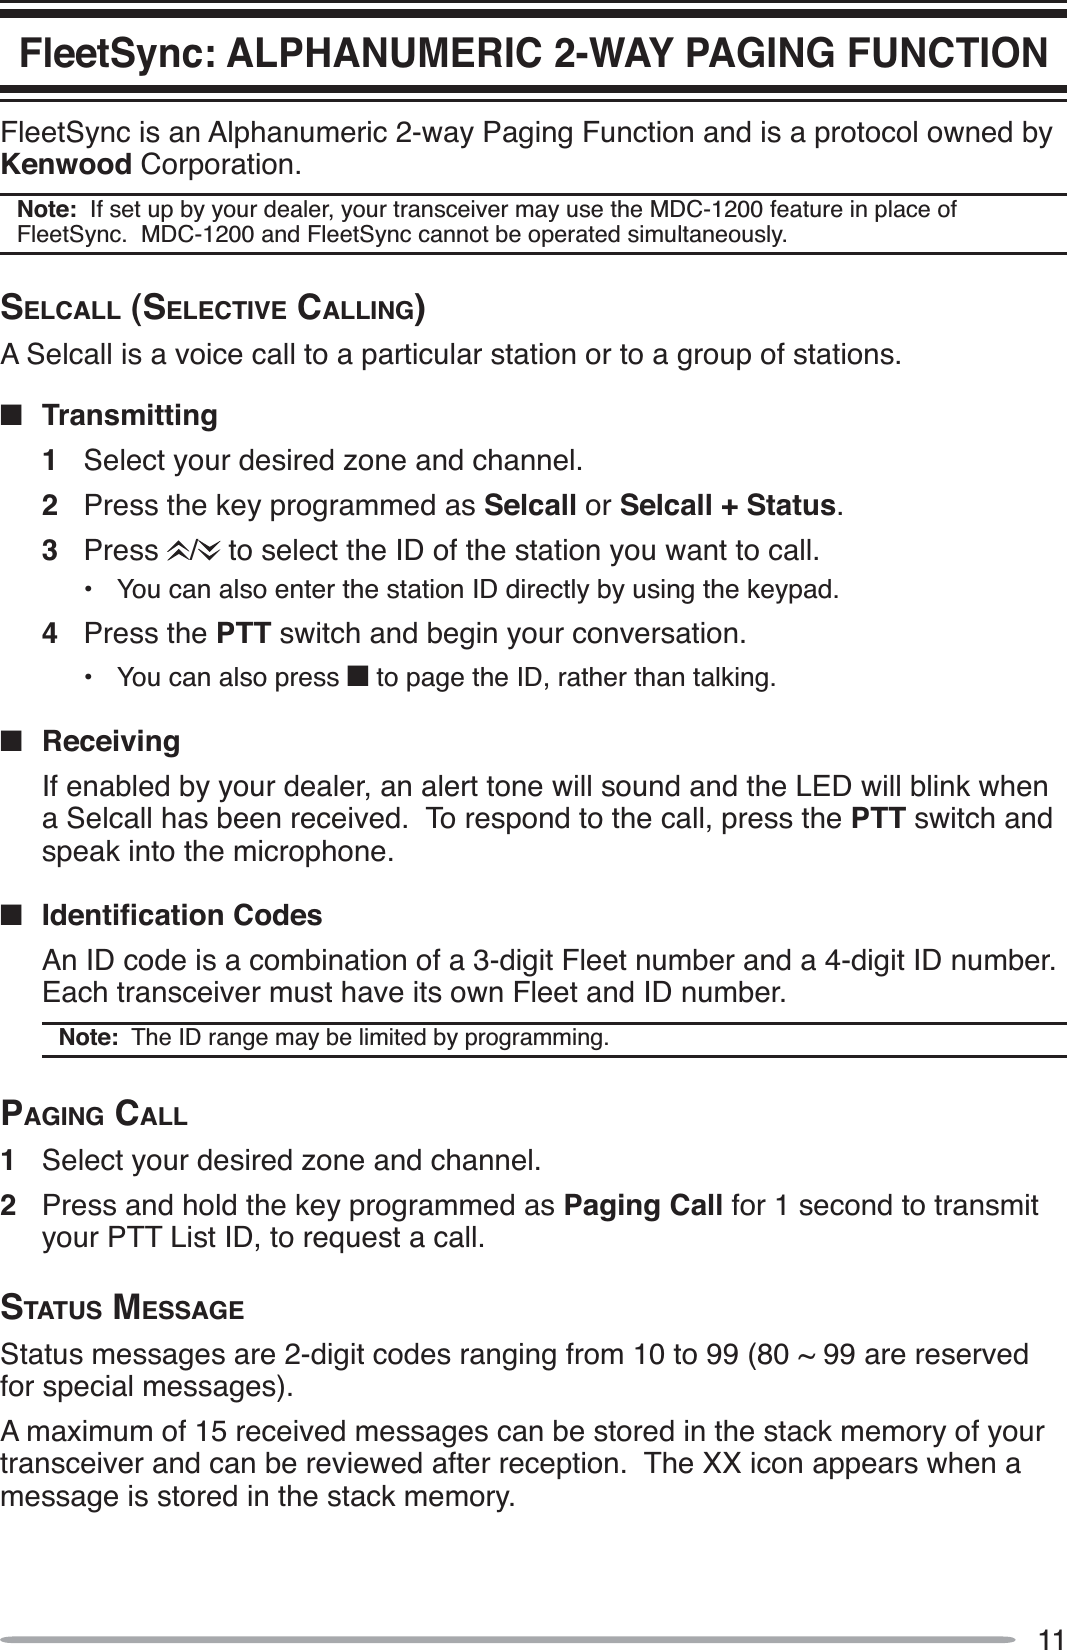 11FleetSync: ALPHANUMERIC 2-WAY PAGING FUNCTIONFleetSync is an Alphanumeric 2-way Paging Function and is a protocol owned by Kenwood Corporation.Note:  If set up by your dealer, your transceiver may use the MDC-1200 feature in place of FleetSync.  MDC-1200 and FleetSync cannot be operated simultaneously.SELCALL (SELECTIVE CALLING)A Selcall is a voice call to a particular station or to a group of stations.QTransmitting1Select your desired zone and channel.2Press the key programmed as Selcall or Selcall + Status.3Press /  to select the ID of the station you want to call.• You can also enter the station ID directly by using the keypad.4Press the PTT switch and begin your conversation.• You can also press Q to page the ID, rather than talking.QReceivingIf enabled by your dealer, an alert tone will sound and the LED will blink when a Selcall has been received.  To respond to the call, press the PTT switch and speak into the microphone.Q ,GHQWLÀFDWLRQ&amp;RGHVAn ID code is a combination of a 3-digit Fleet number and a 4-digit ID number.  Each transceiver must have its own Fleet and ID number.Note:  The ID range may be limited by programming.PAGING CALL1Select your desired zone and channel.2Press and hold the key programmed as Paging Call for 1 second to transmit your PTT List ID, to request a call.STATUS MESSAGEStatus messages are 2-digit codes ranging from 10 to 99 (80 ~ 99 are reserved for special messages).A maximum of 15 received messages can be stored in the stack memory of your transceiver and can be reviewed after reception.  The XX icon appears when a message is stored in the stack memory. 